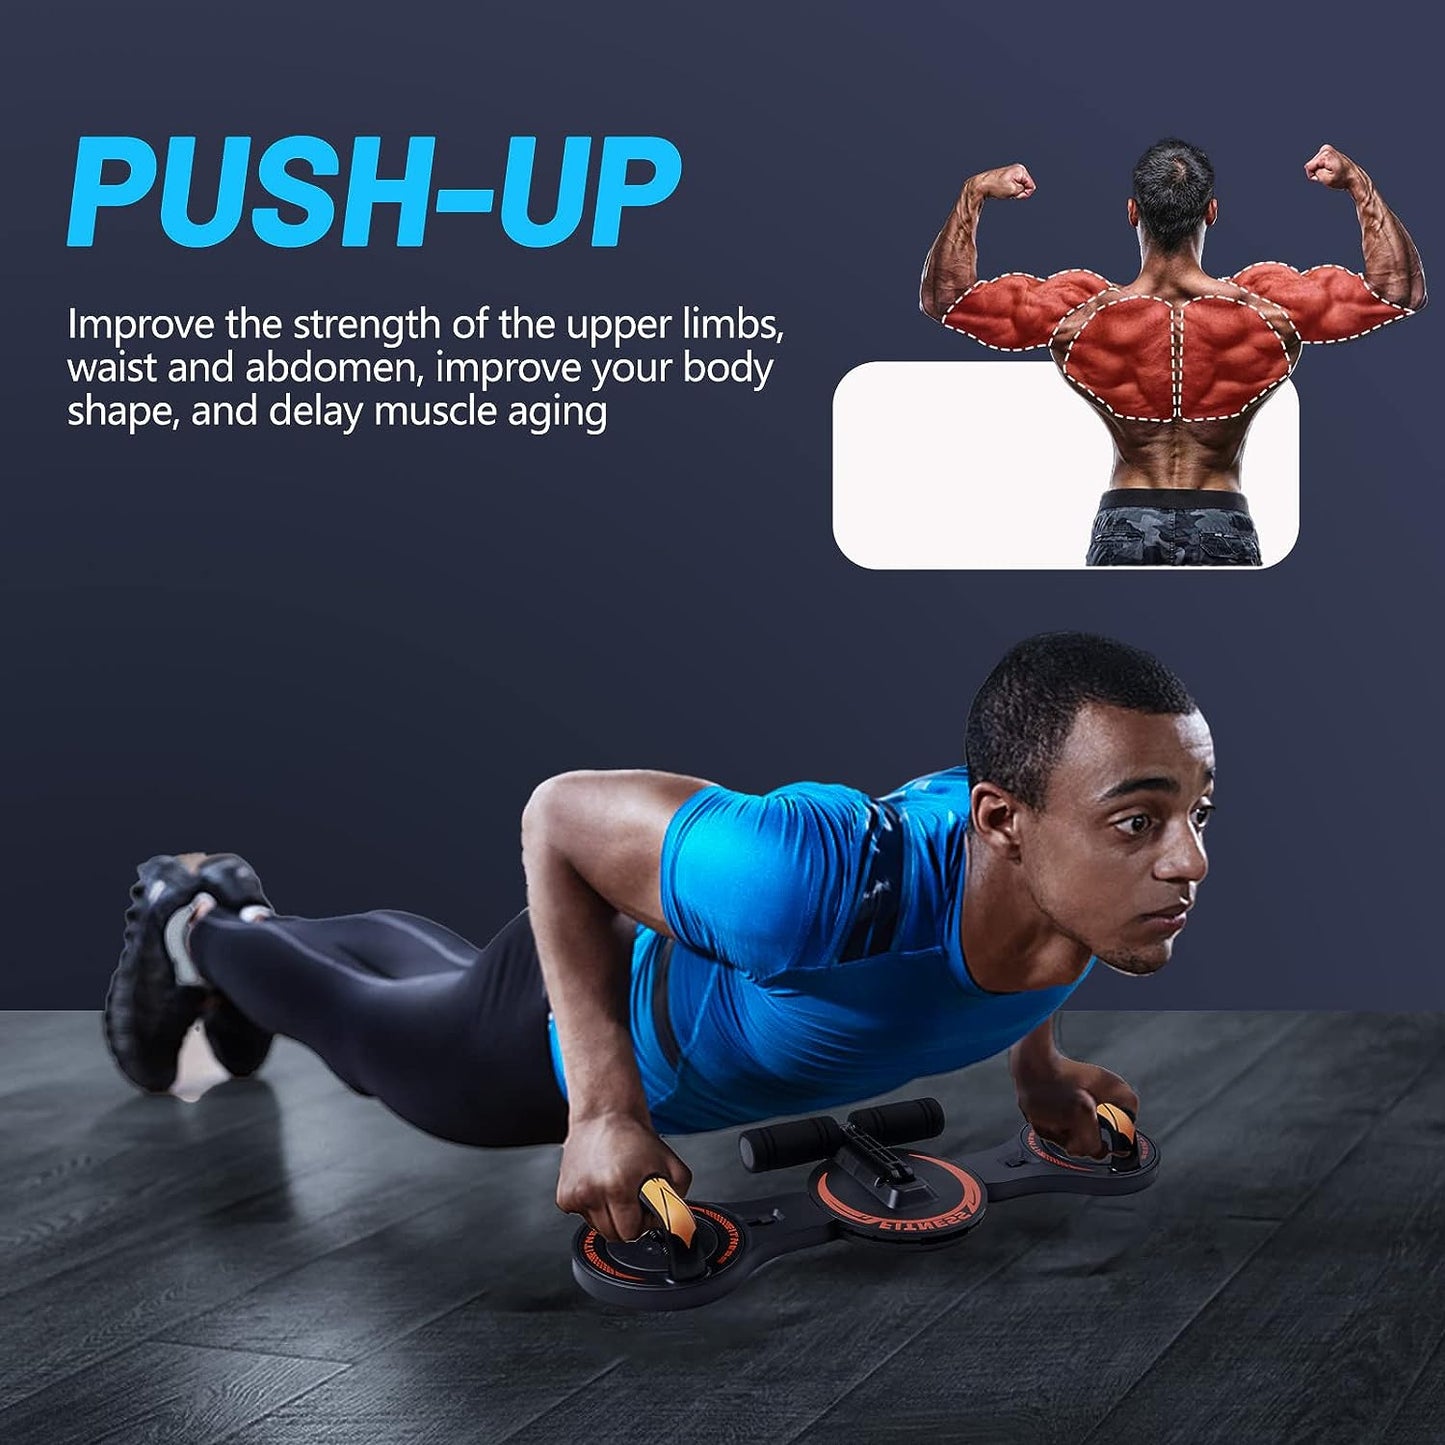 Push Up Board， Multi-Functional 2 in 1 Push Up Bar with Resistance Bands, Portable Home Gym, Strength Training Equipment for Perfect Pushups, Home Fitness for Men and Women (UP Black)